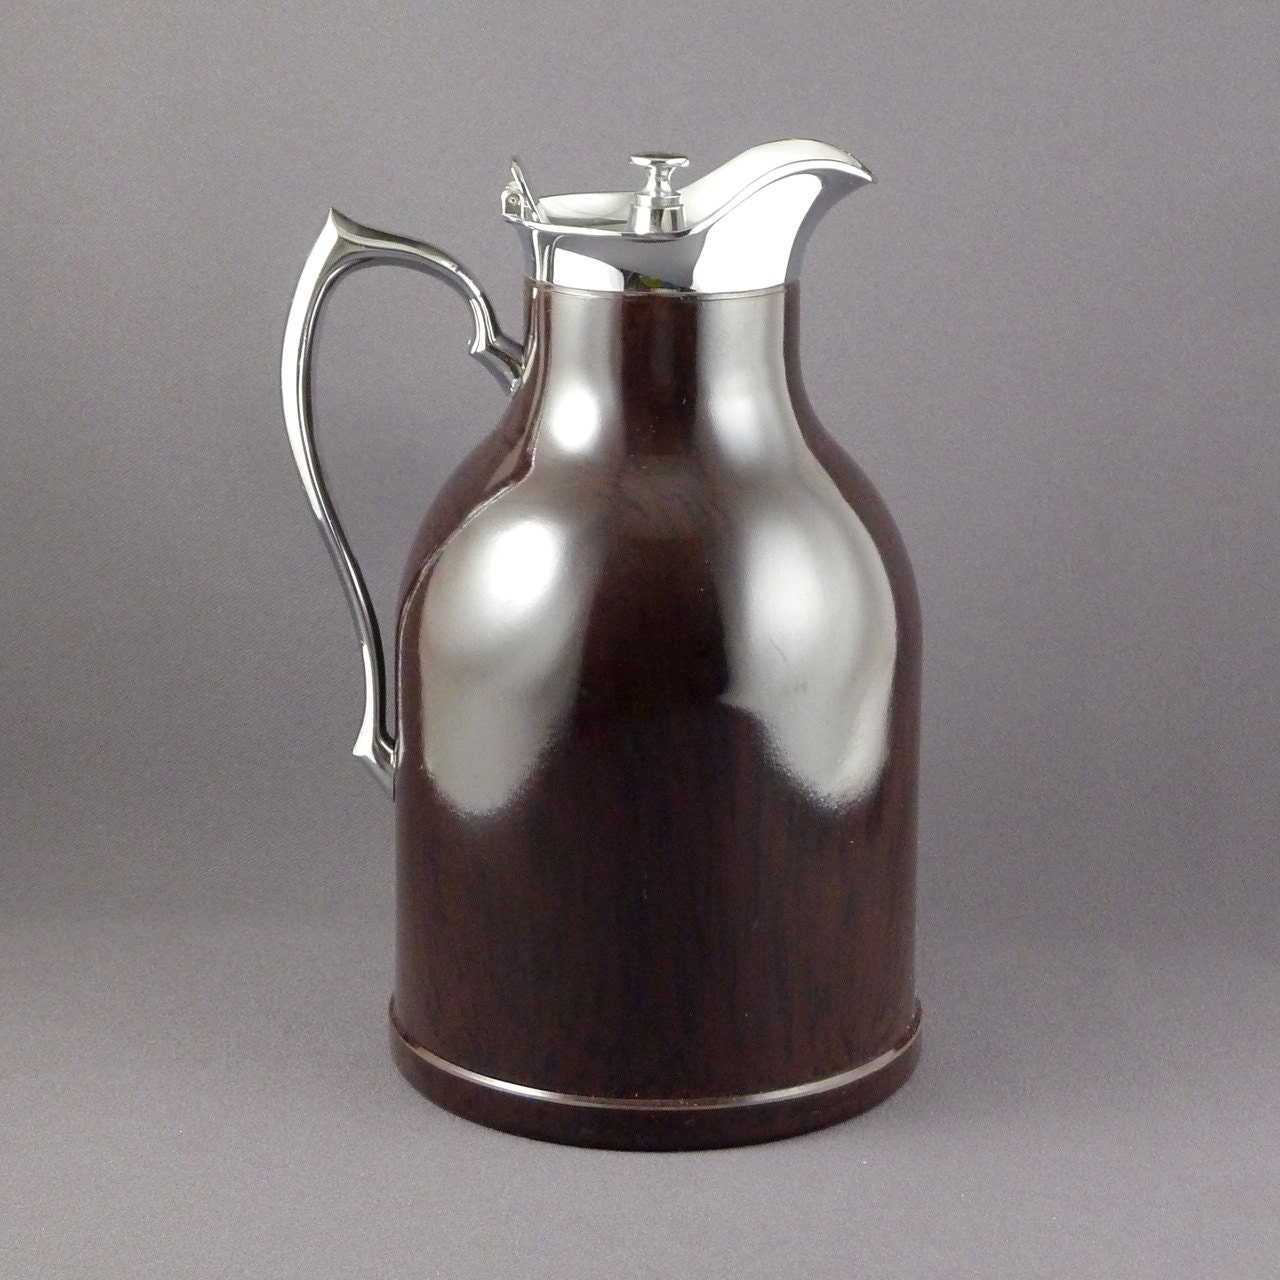 Vintage Thermos carafe 1940s 1950s MCM design by